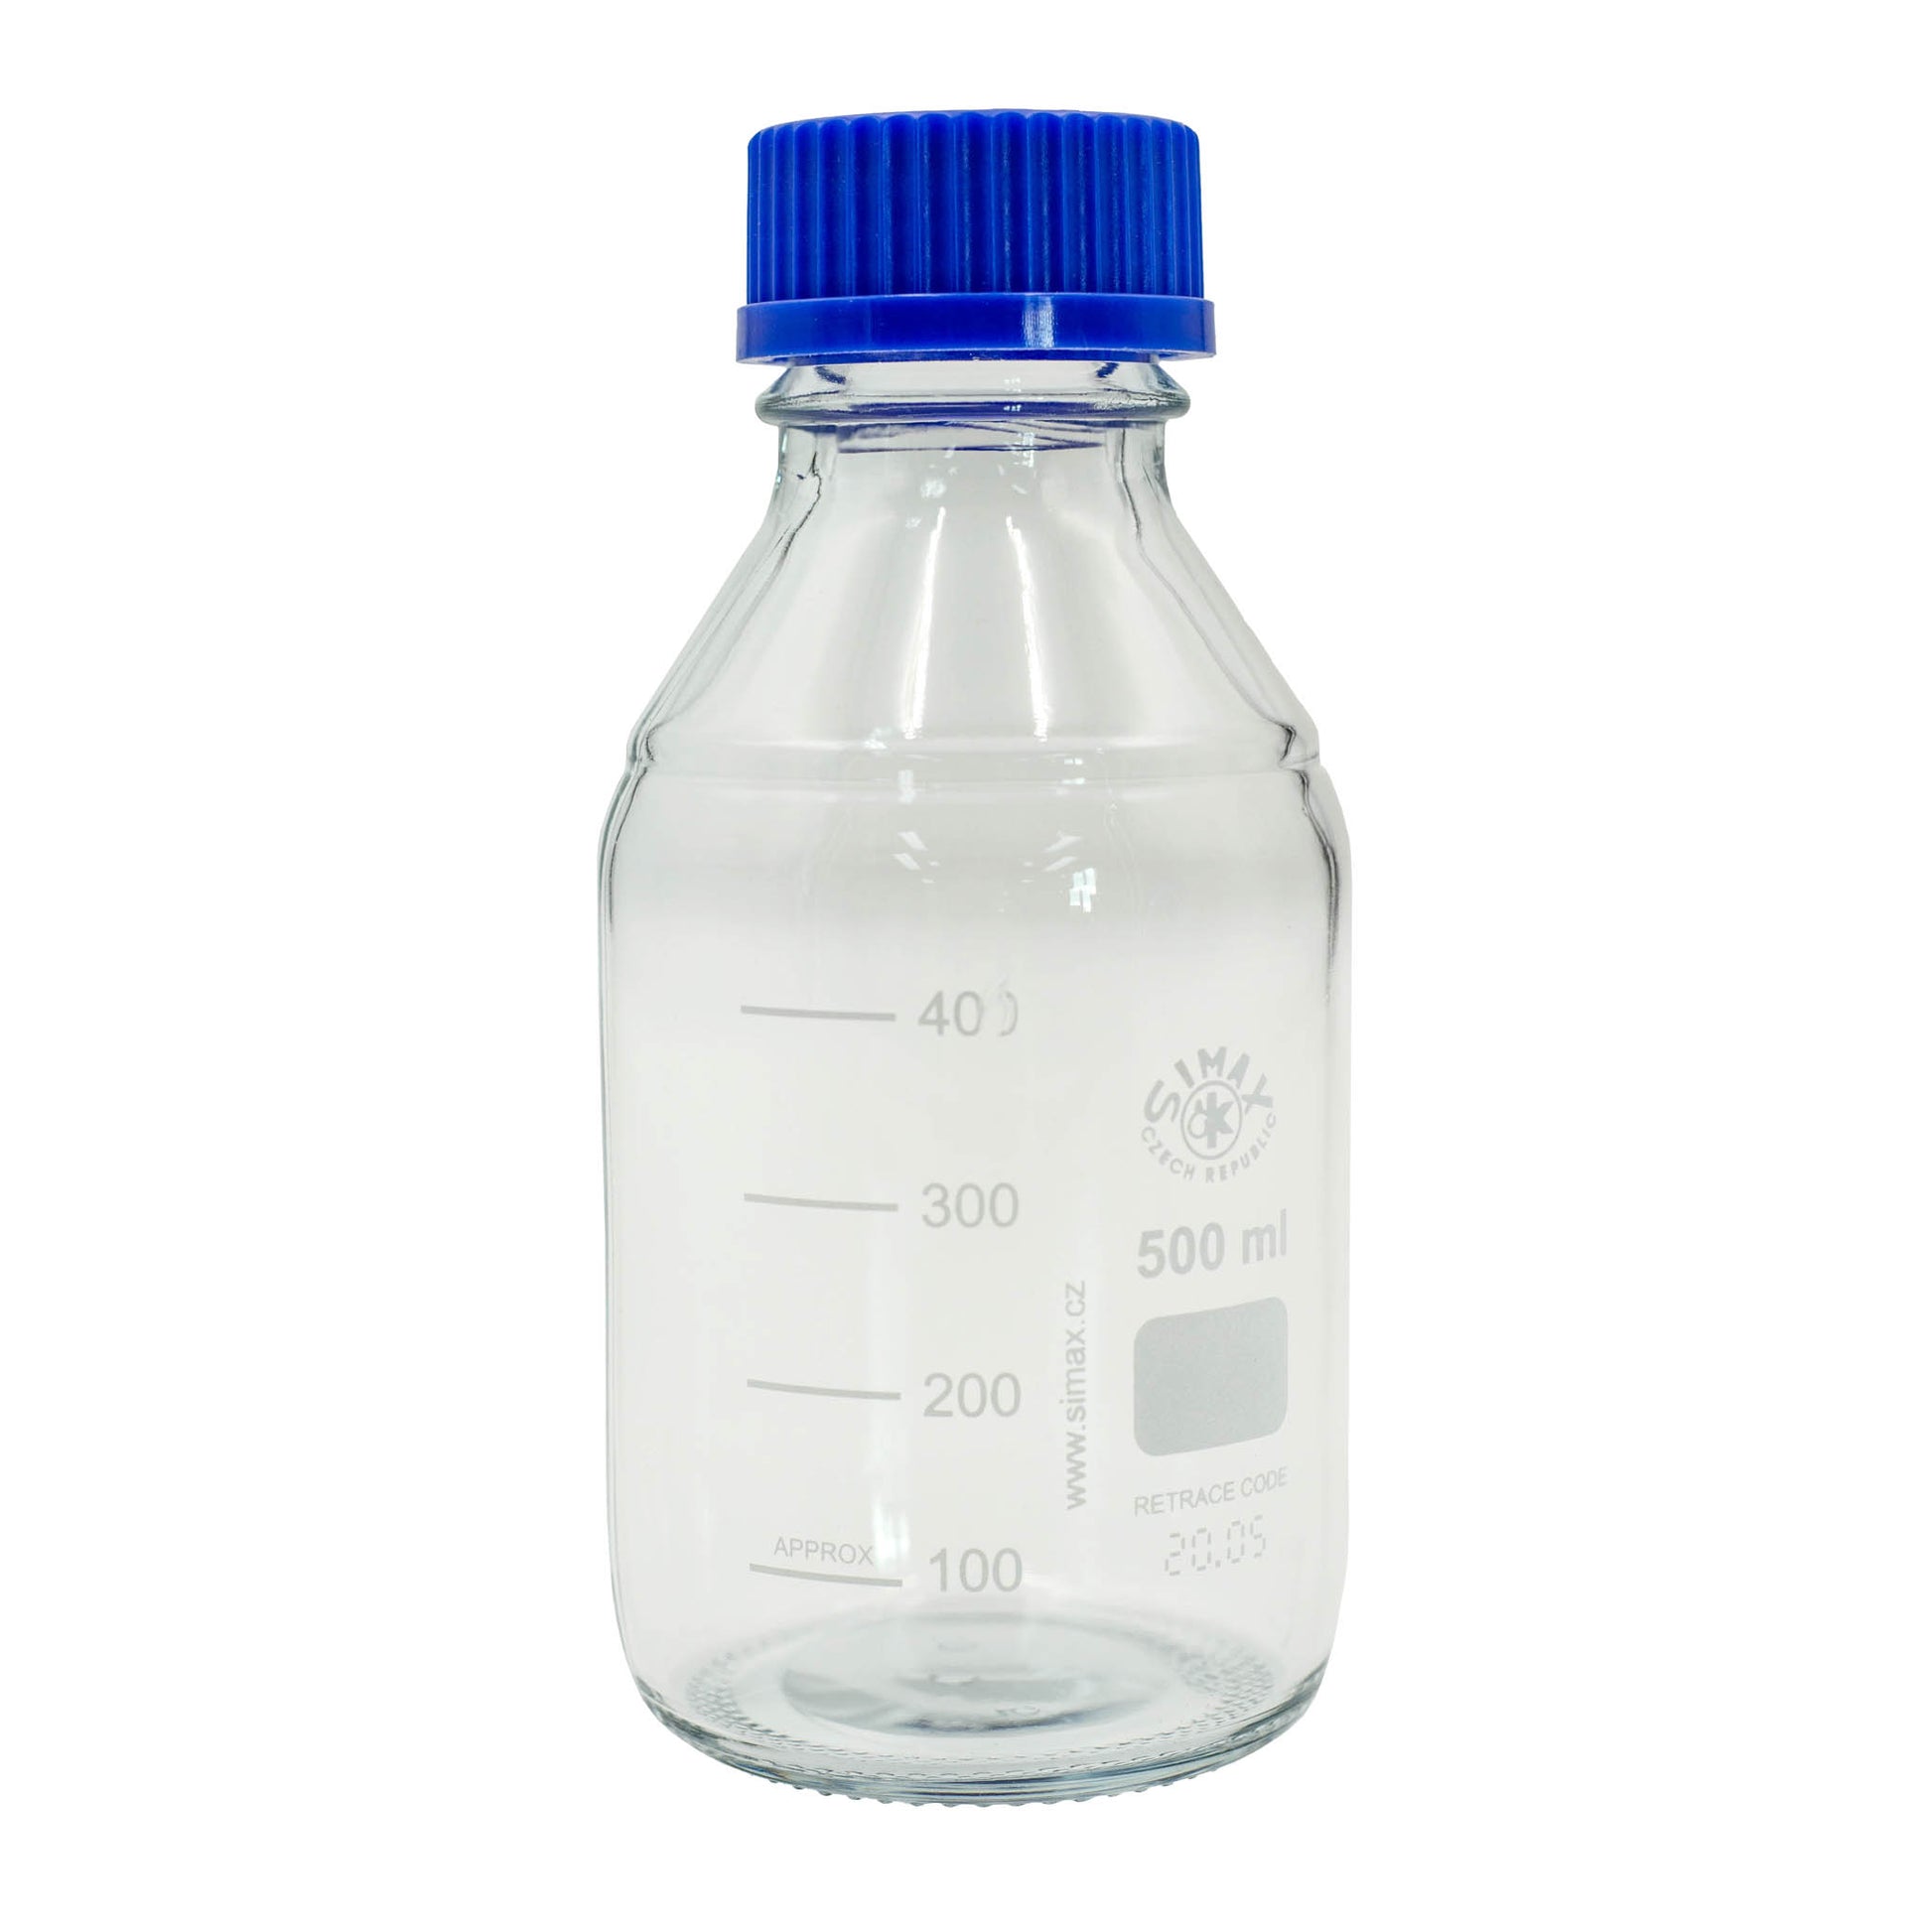 500ml borosilicate lab bottle with lid. Made with silica and boron trioxide making them more resistant to thermal shock than any other common glass.